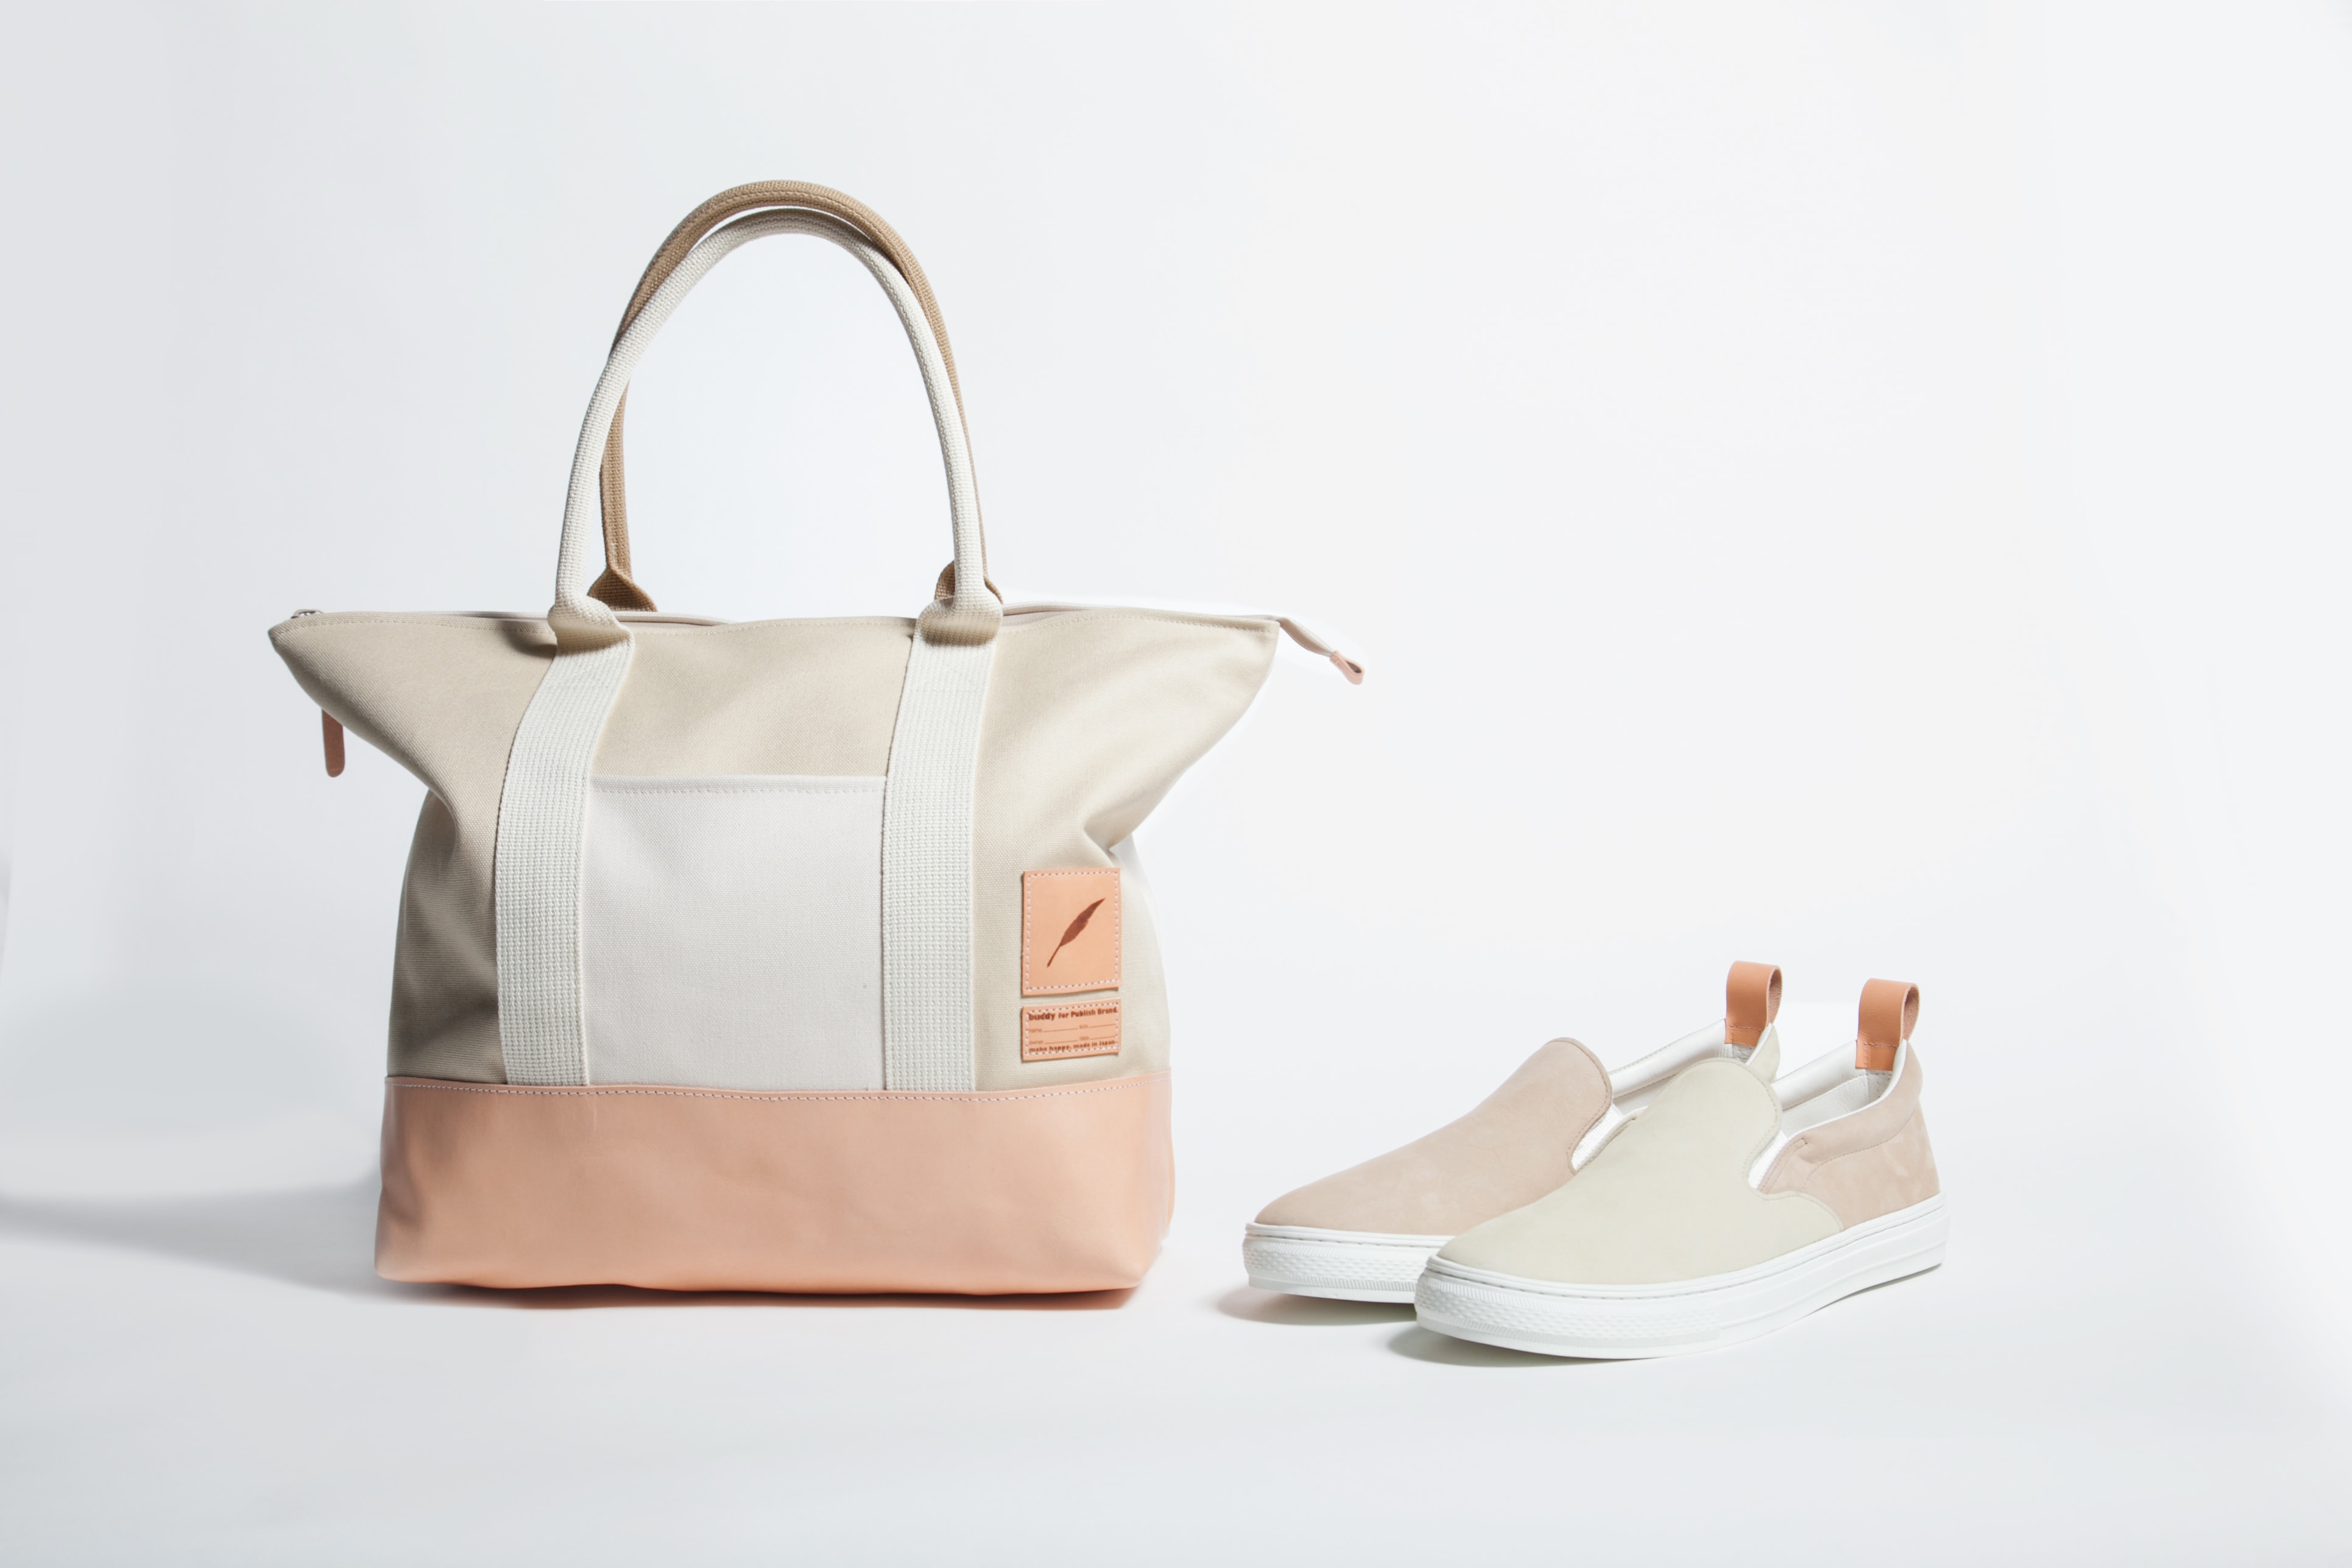 Publish BUDDY Capsule Collection Canvas Tote Bag